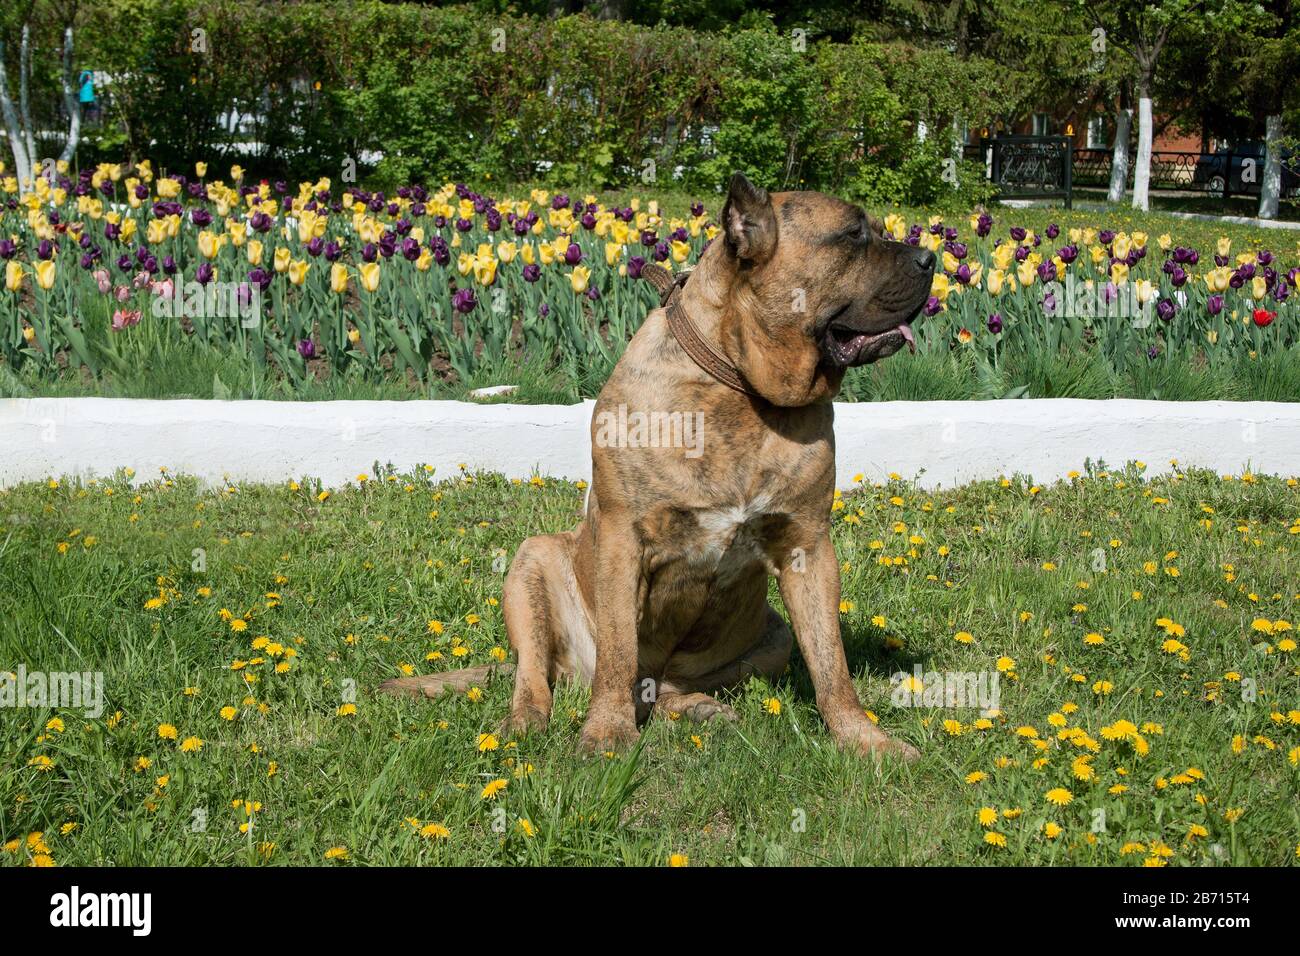 Canary mastiff is sitting near a flower bed with tulips. Canarian molosser or dogo canario. Pet animals. Stock Photo